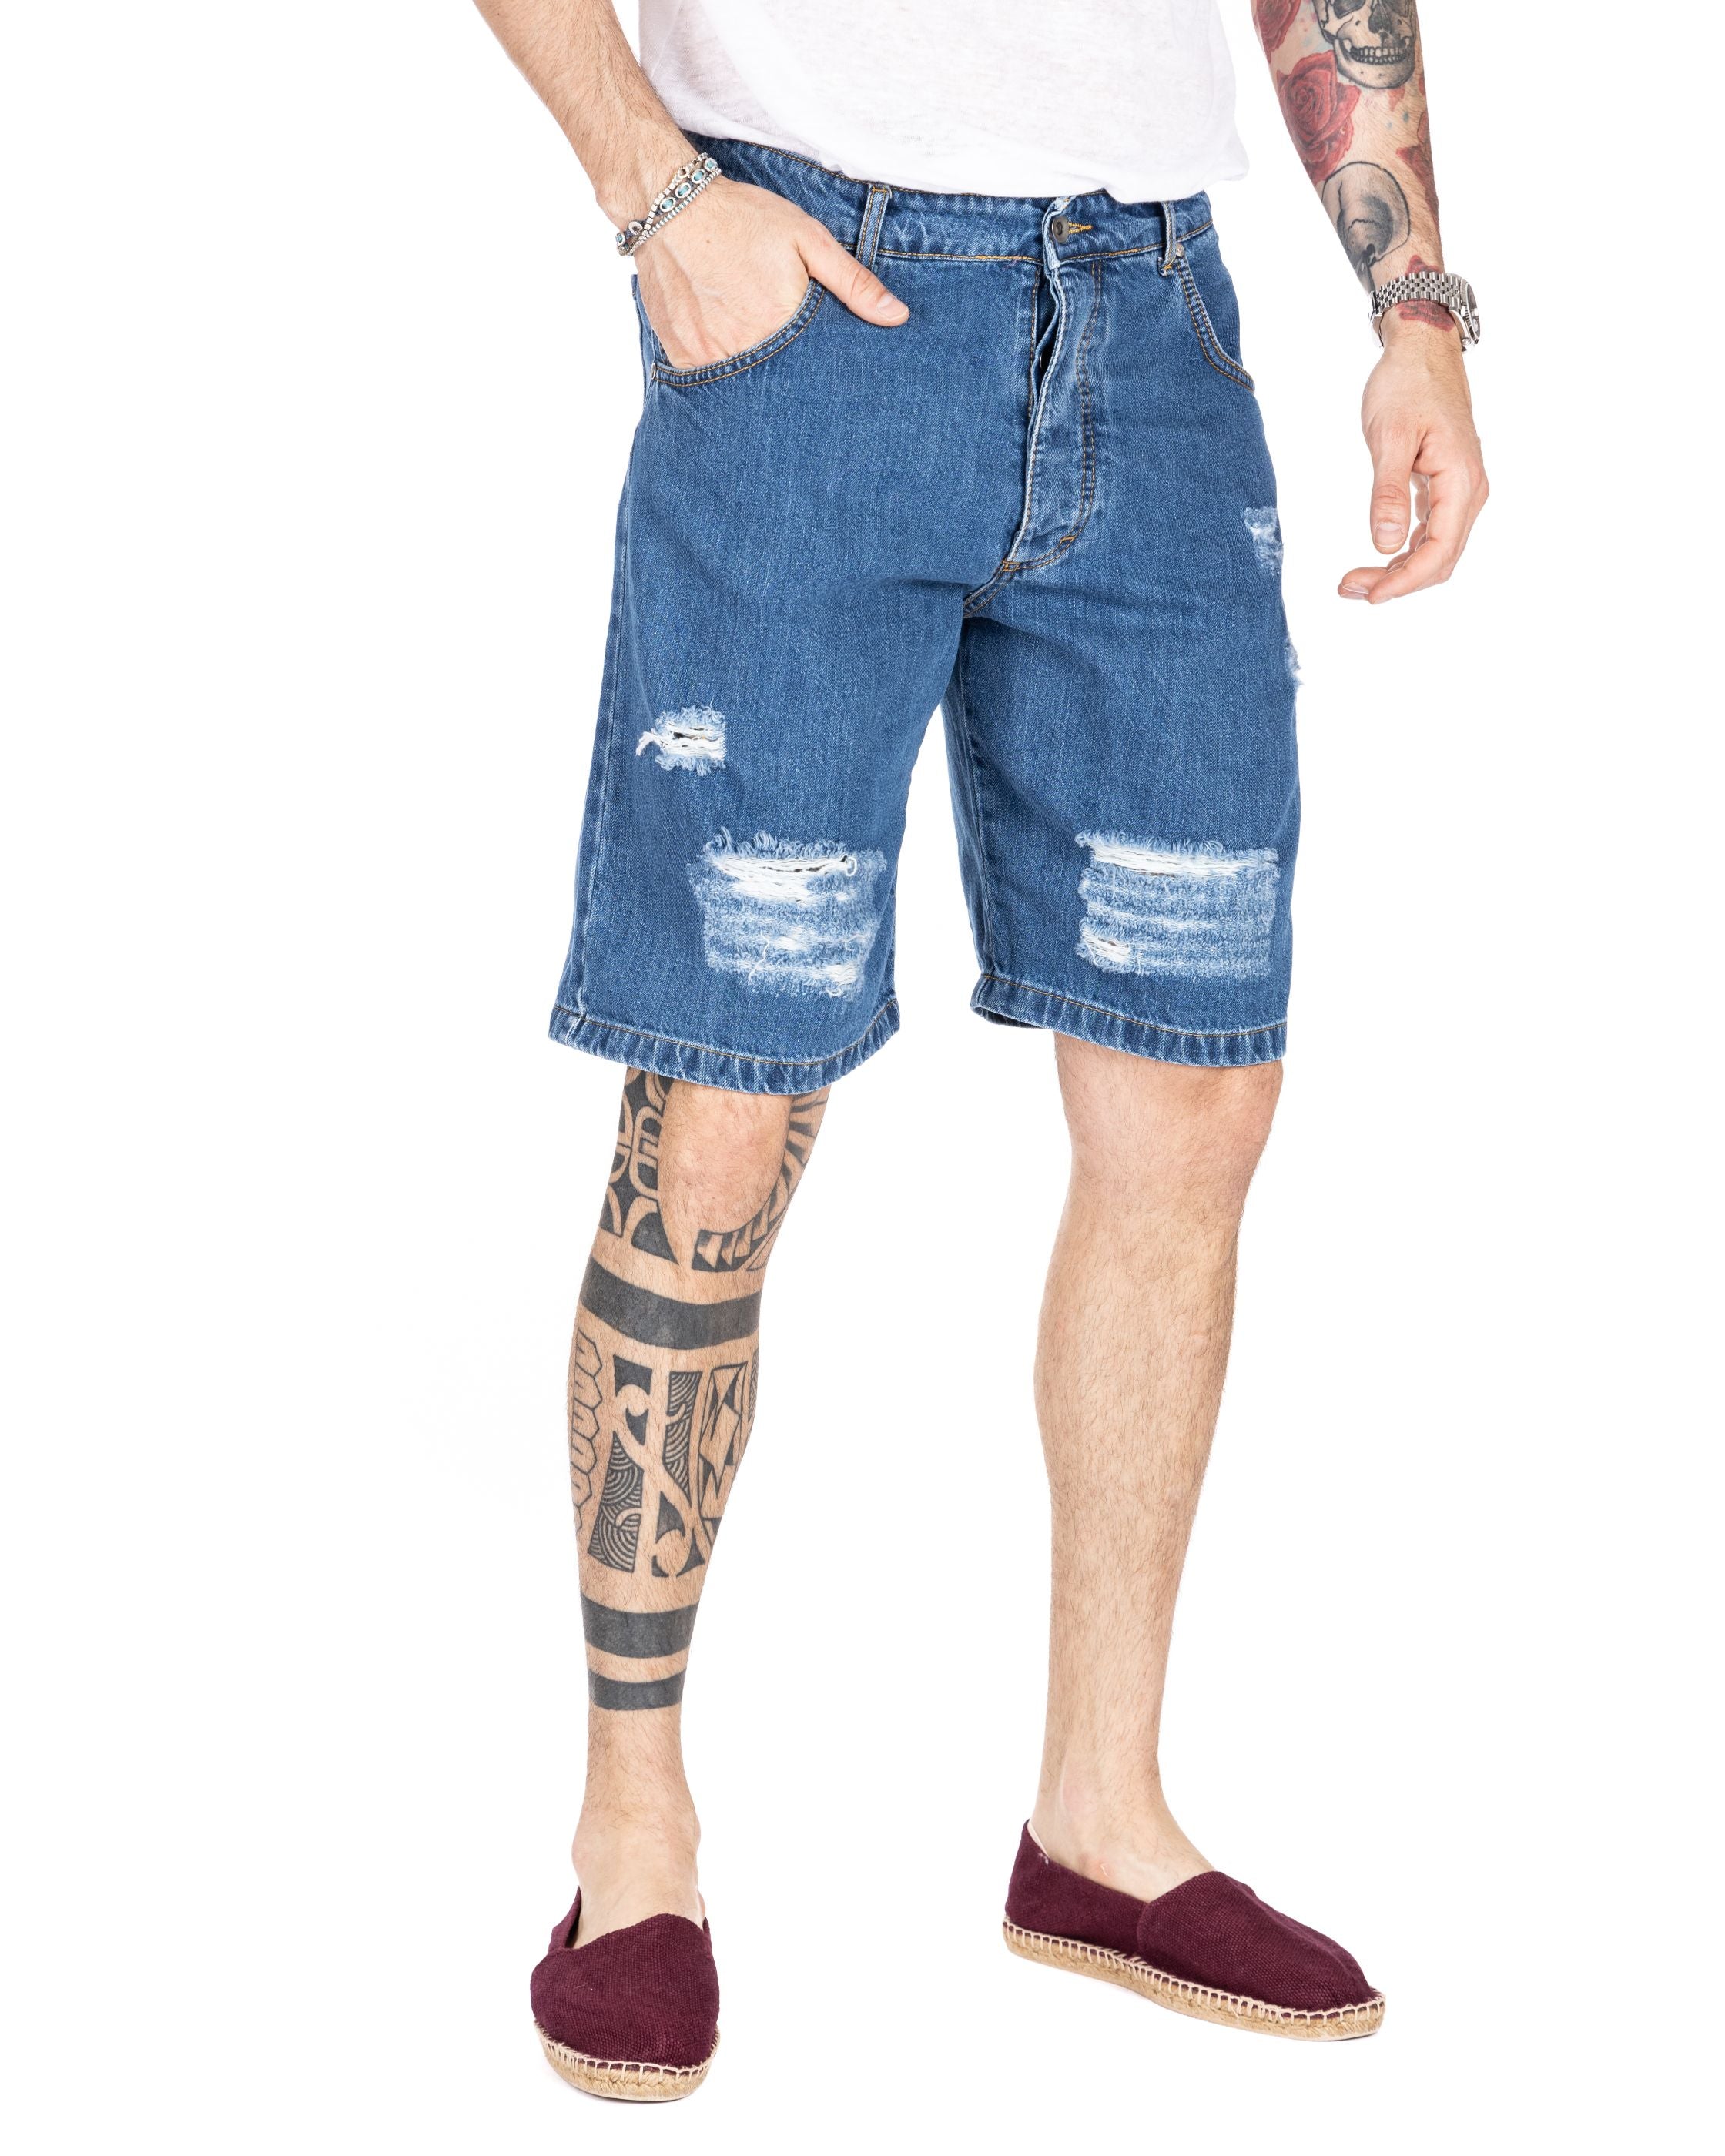 FLOYD - BLUE JEANS BERMUDA WITH RIPS